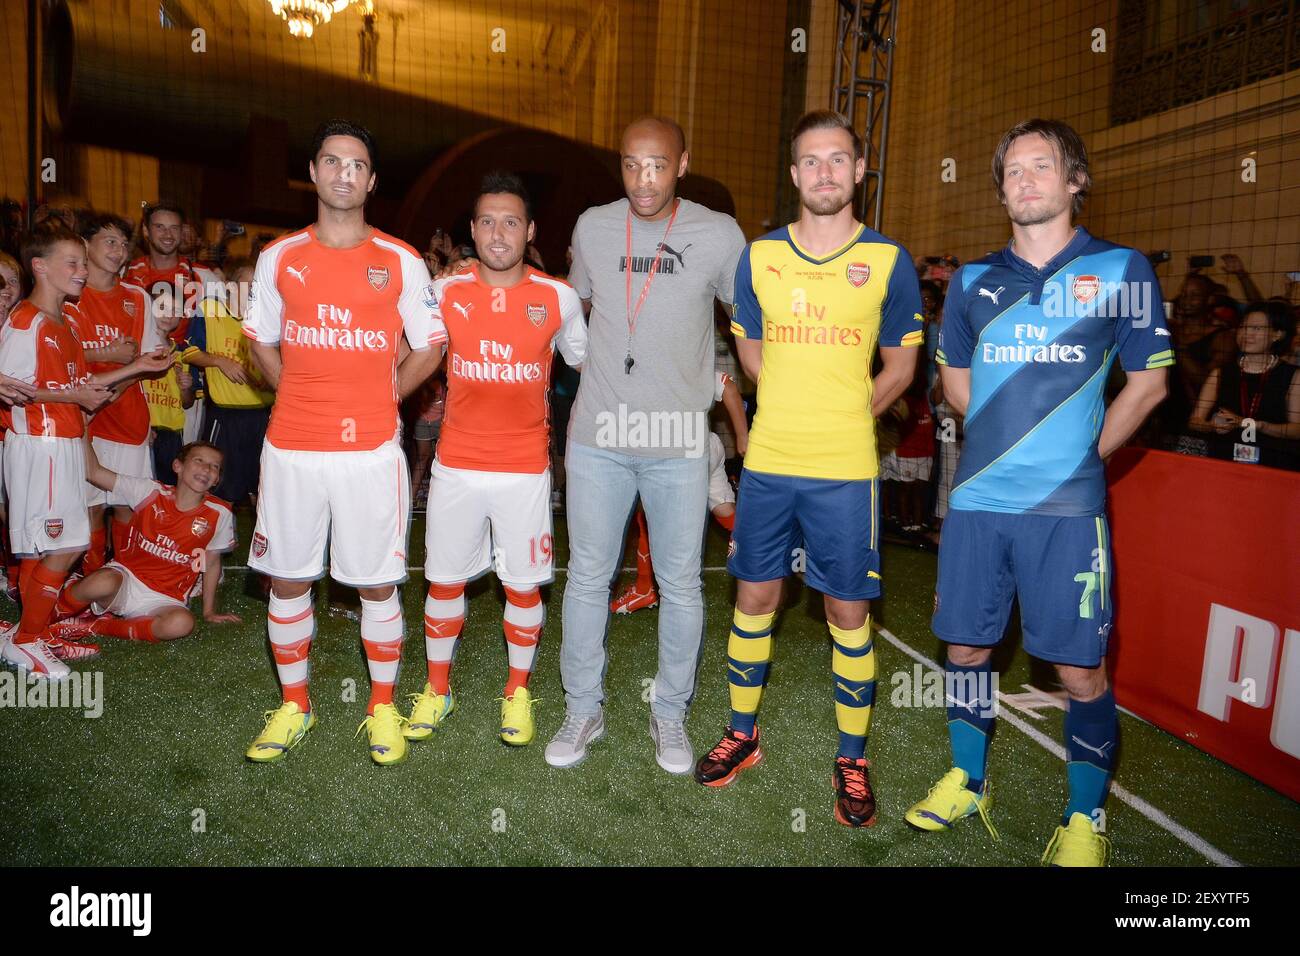 L-R) Soccer players Mikel Arteta, Santi Cazorla, Thierry Henry, Aaron  Ramsey and Tomas Sosicky pose inside Grand Central Terminal as he attends  Puma Partners with Arsenal event in New York, NY, on